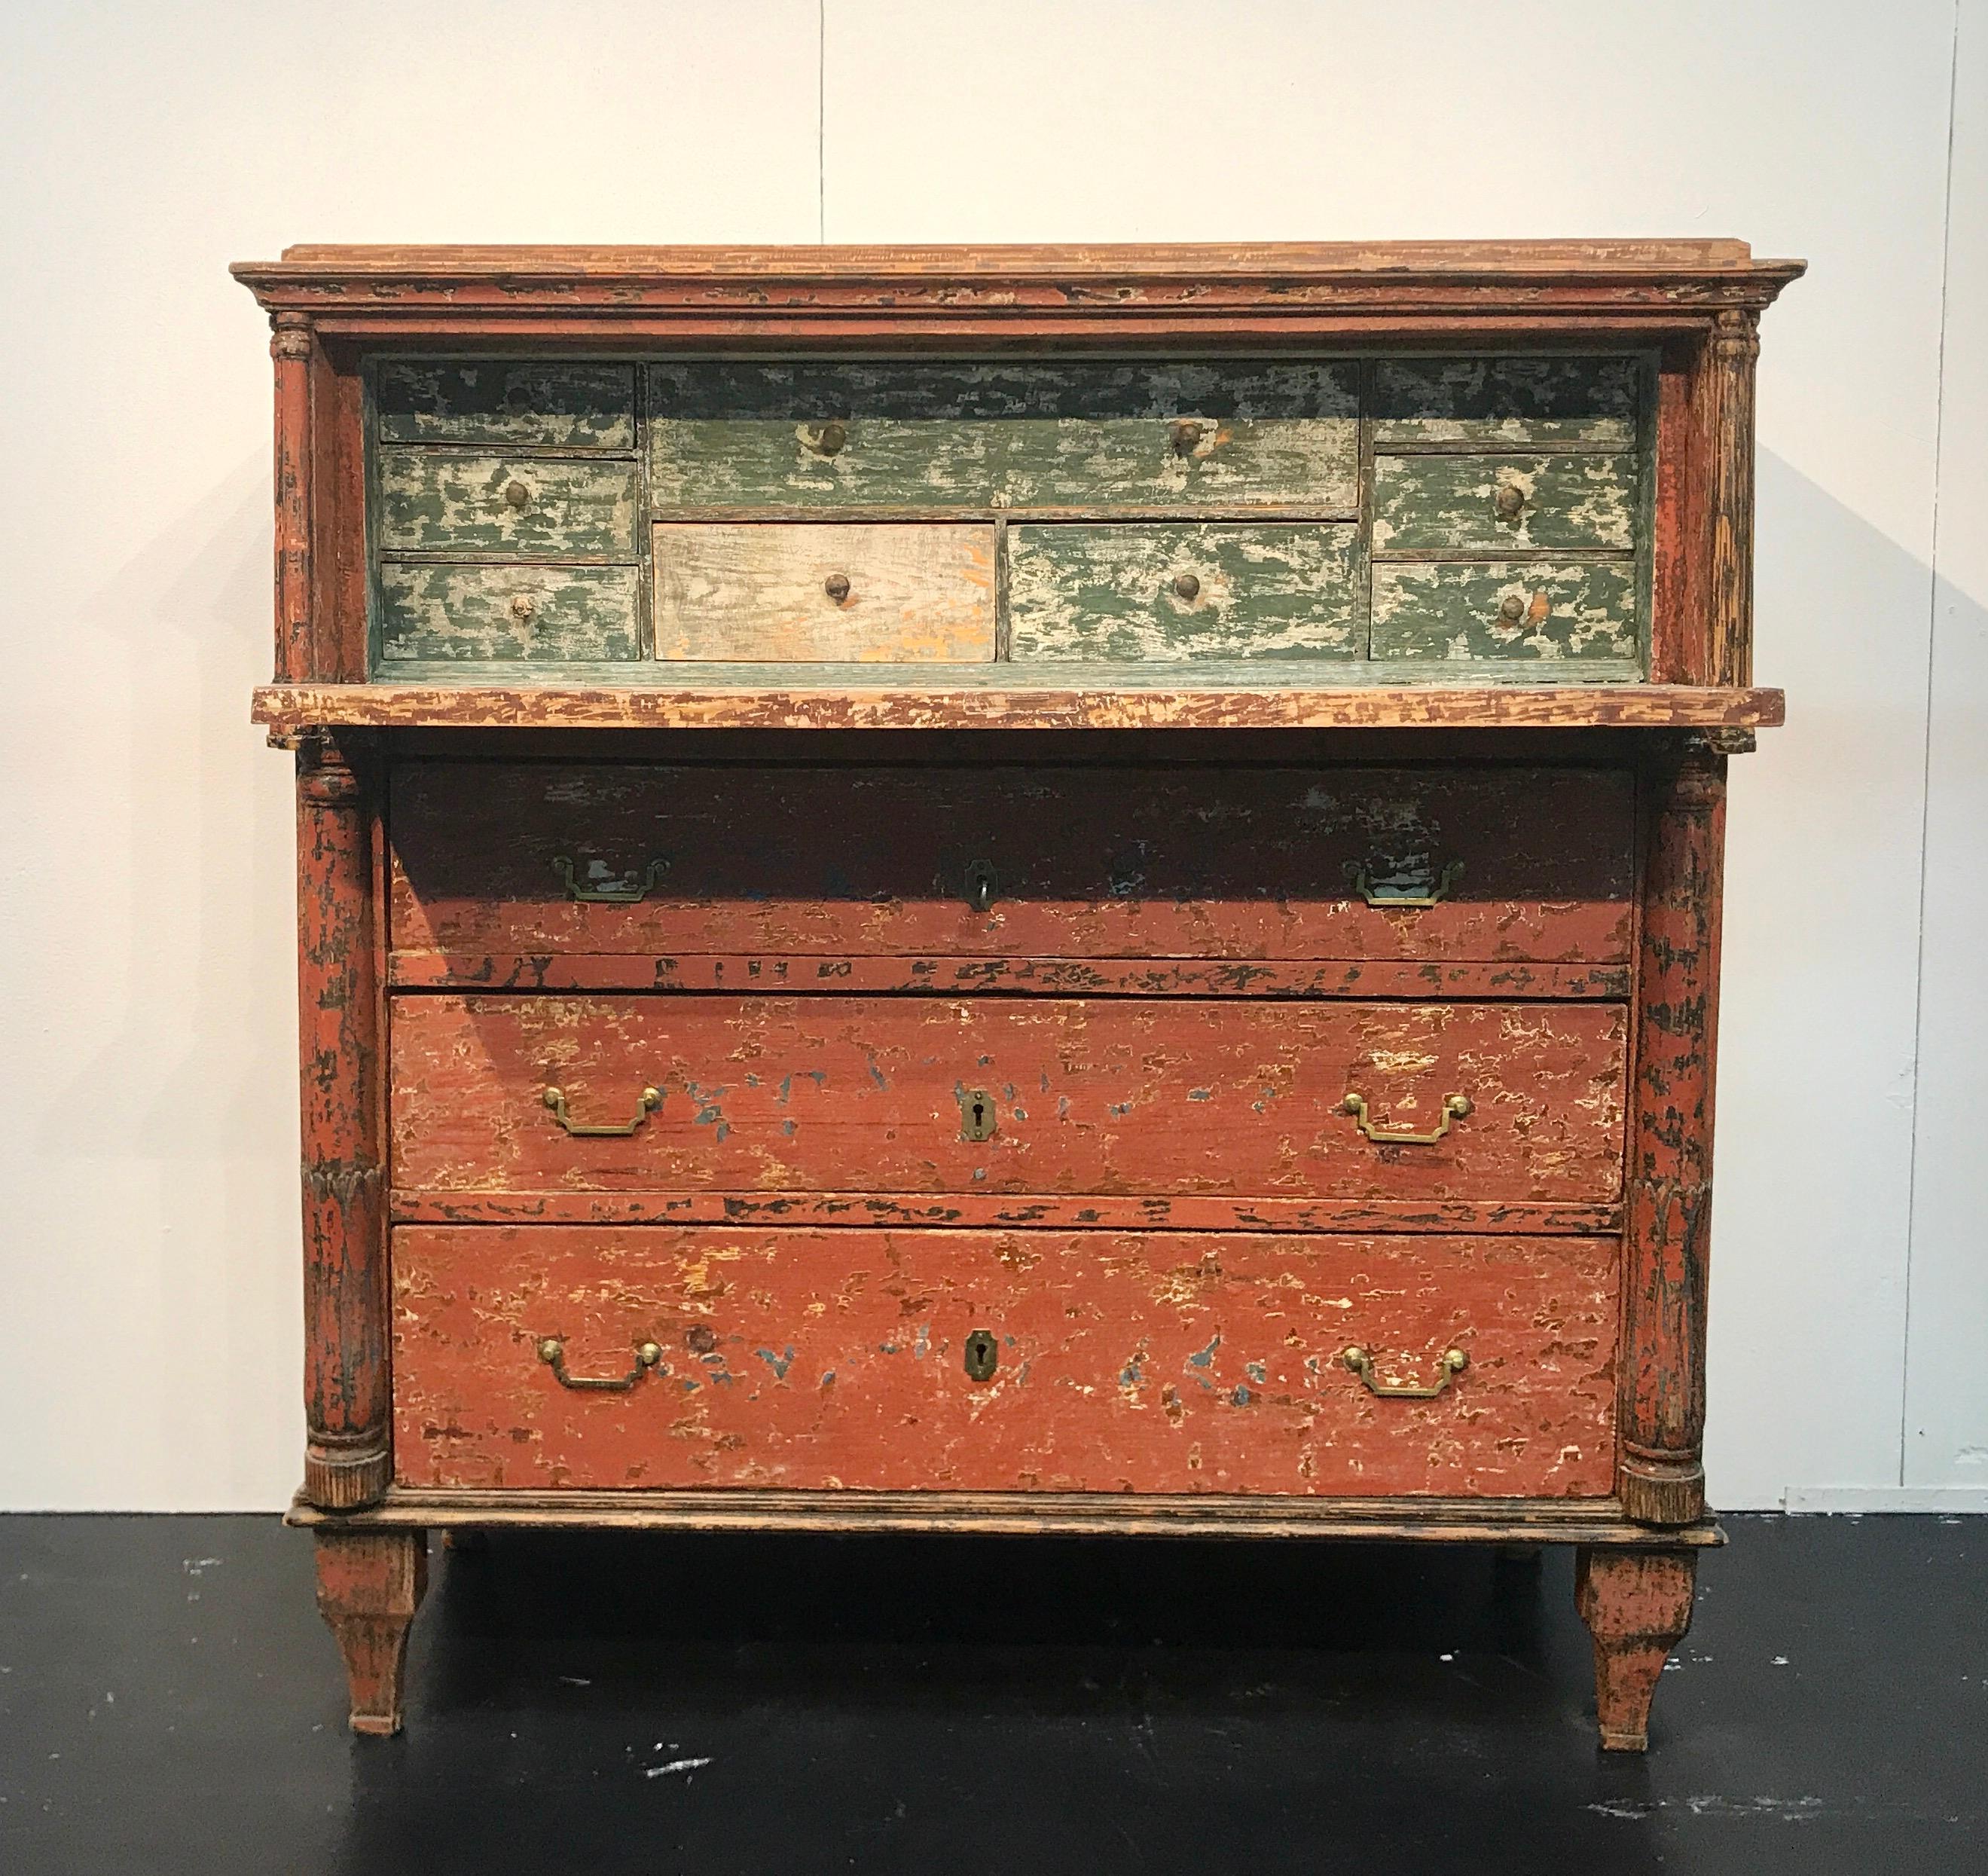 Unique Swedish chest of drawers with fall-front top drawer with original painting produced circa 1850. Three are three big drawers at the bottom and ten small drawers inside. On the corners there are beautiful decorated columns. The exterior is a